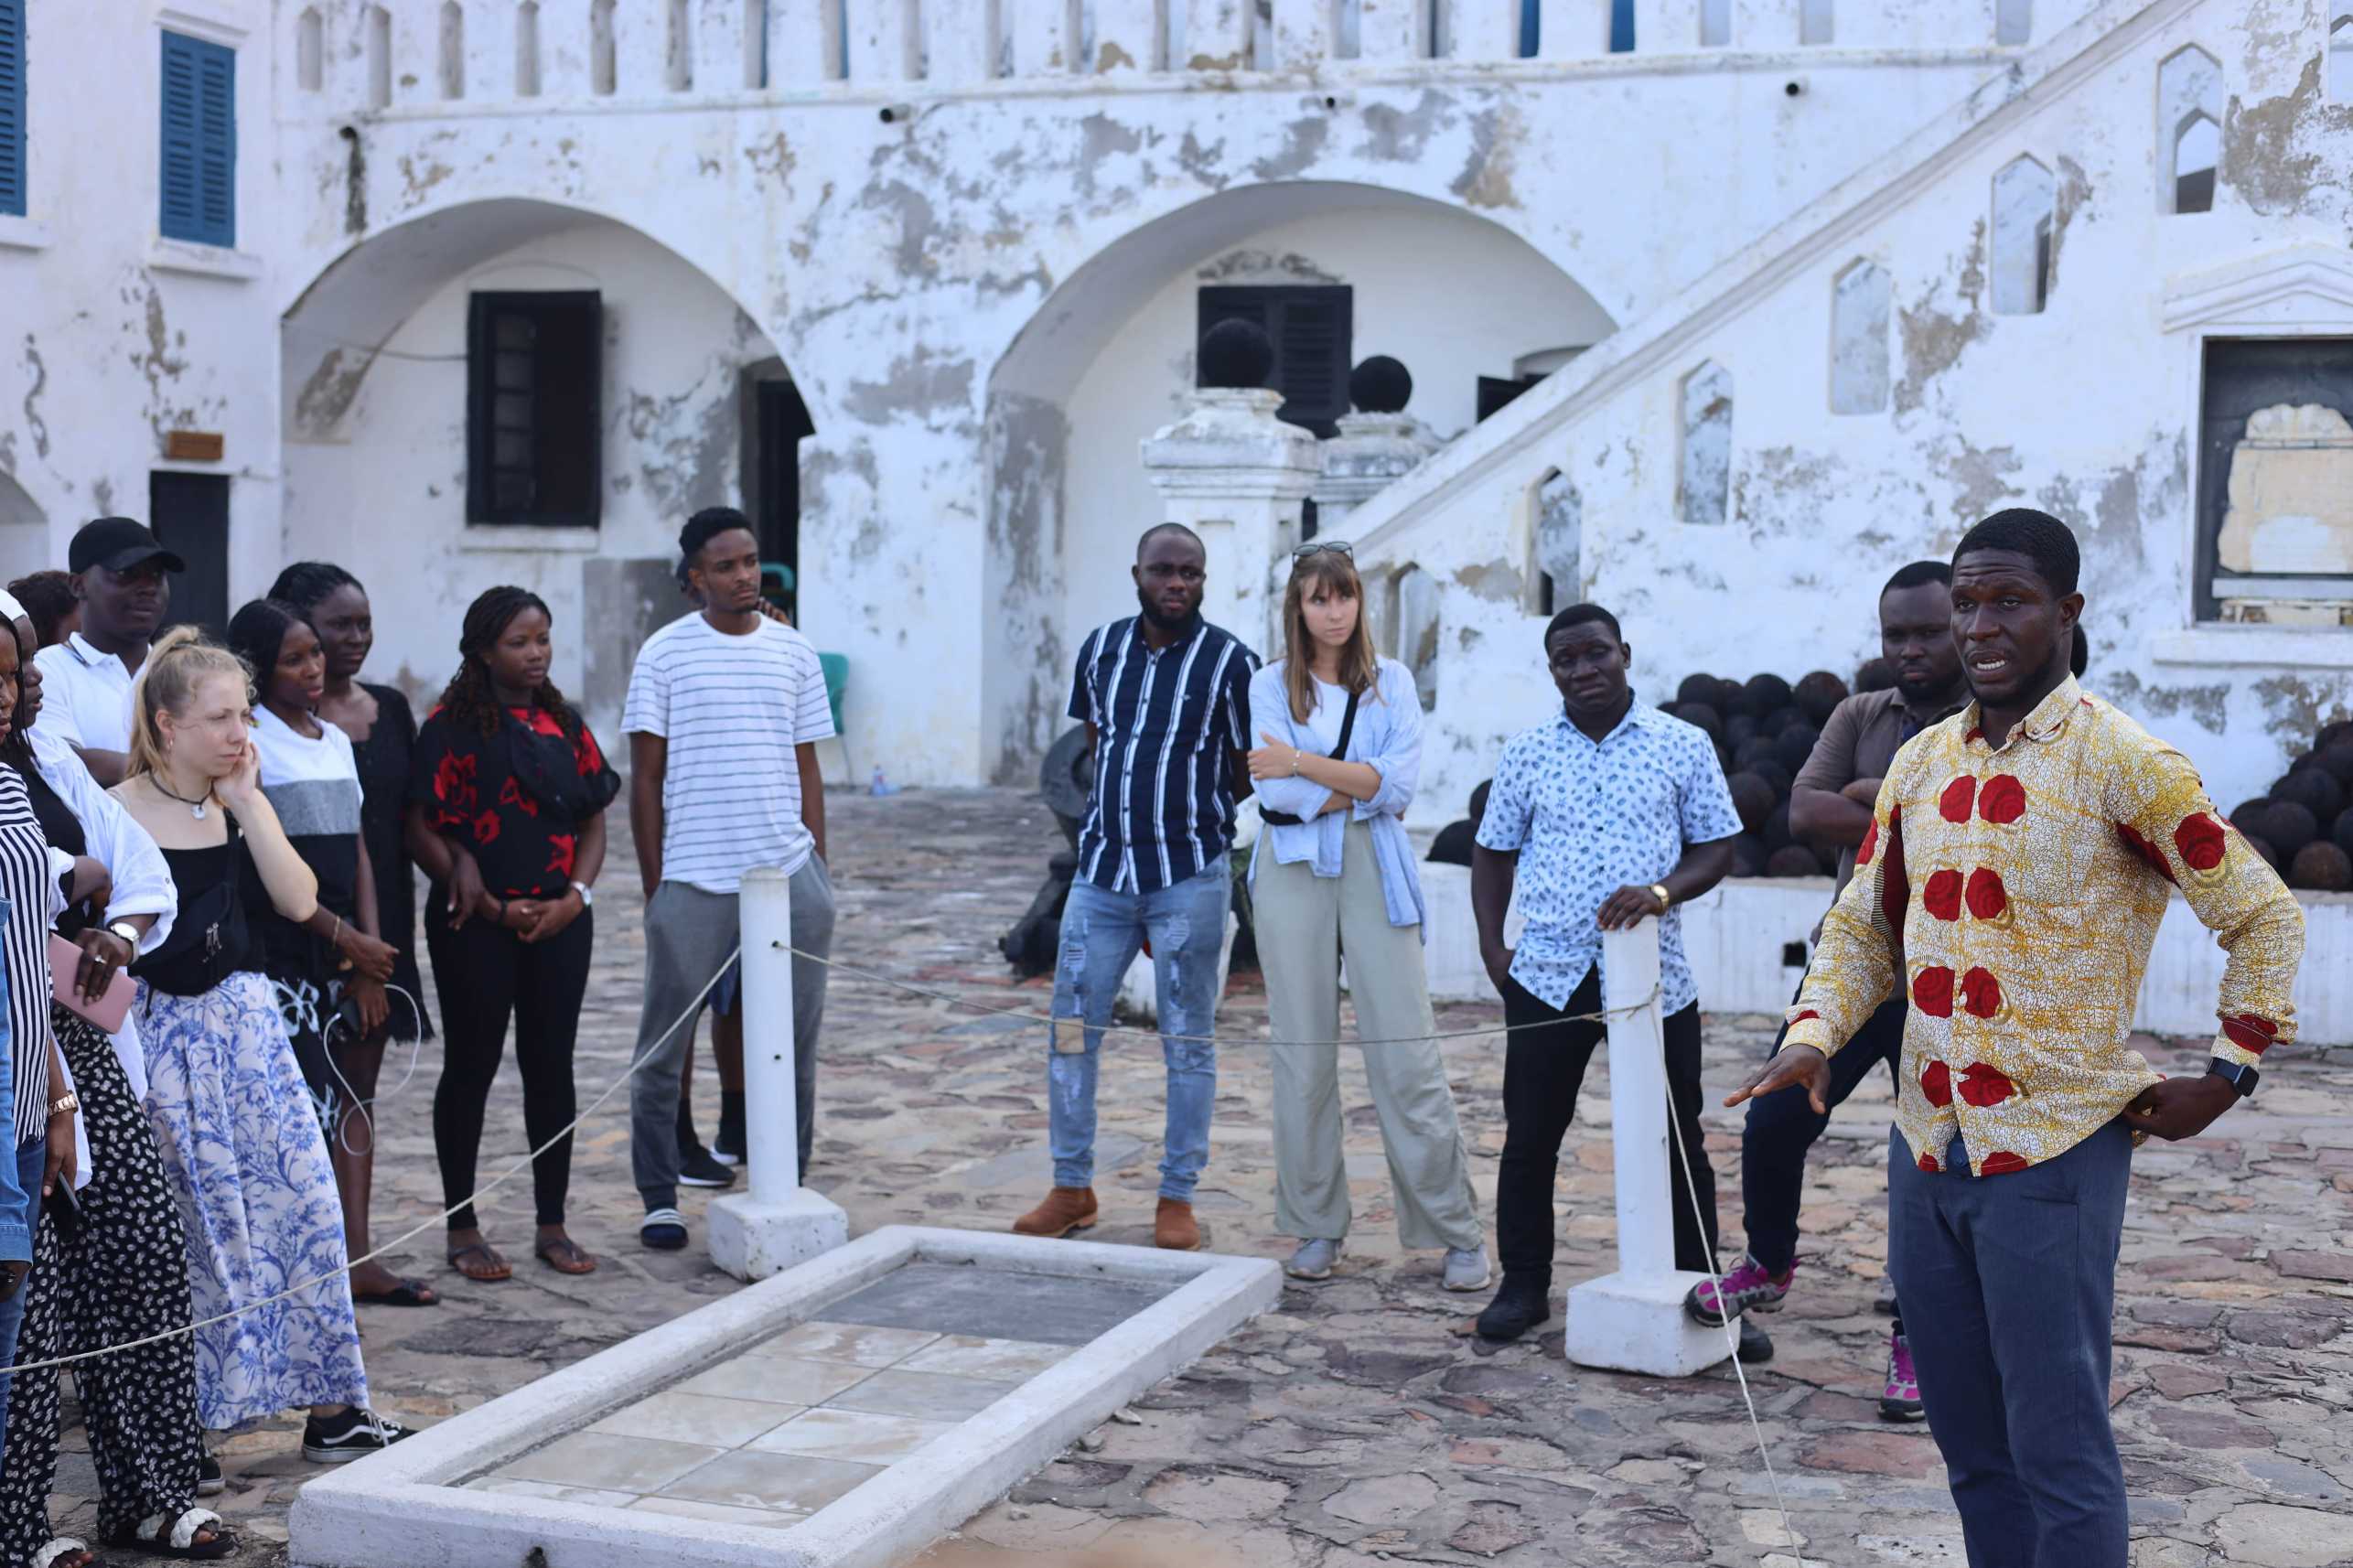 Students also visited the Cape Coast castle, which in colonial times, was a hub where enslaved Africans were held before being forced onto ships.